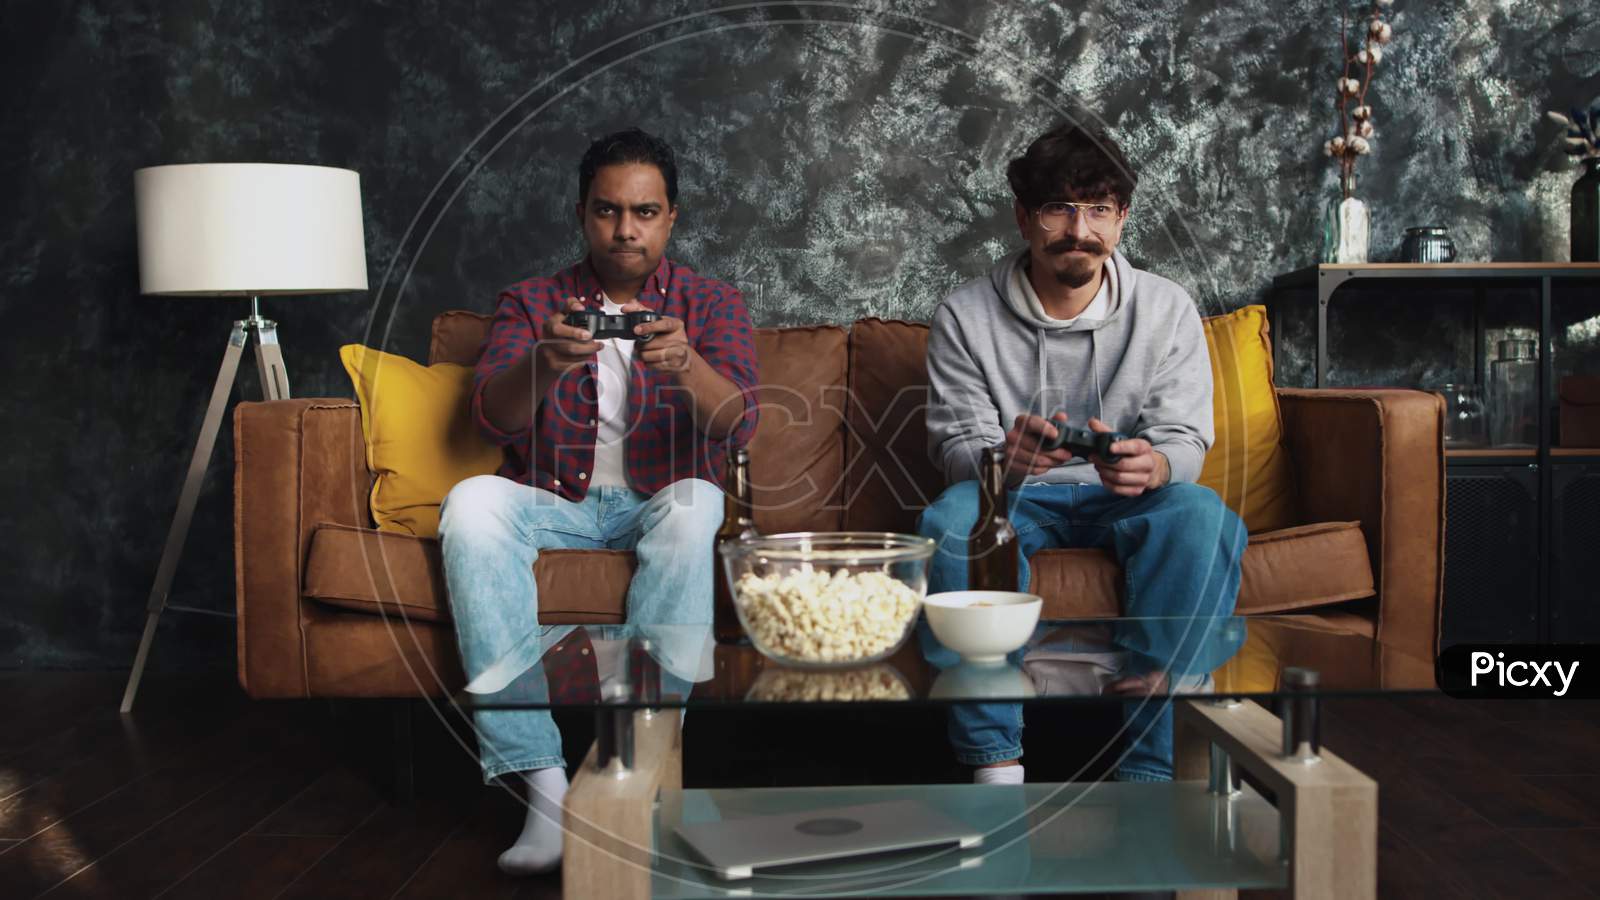 Friends Playing Console Games At Home. Friends At Couch. Gamers At Home. Guys Playing Games. Indian Man Wins The Game